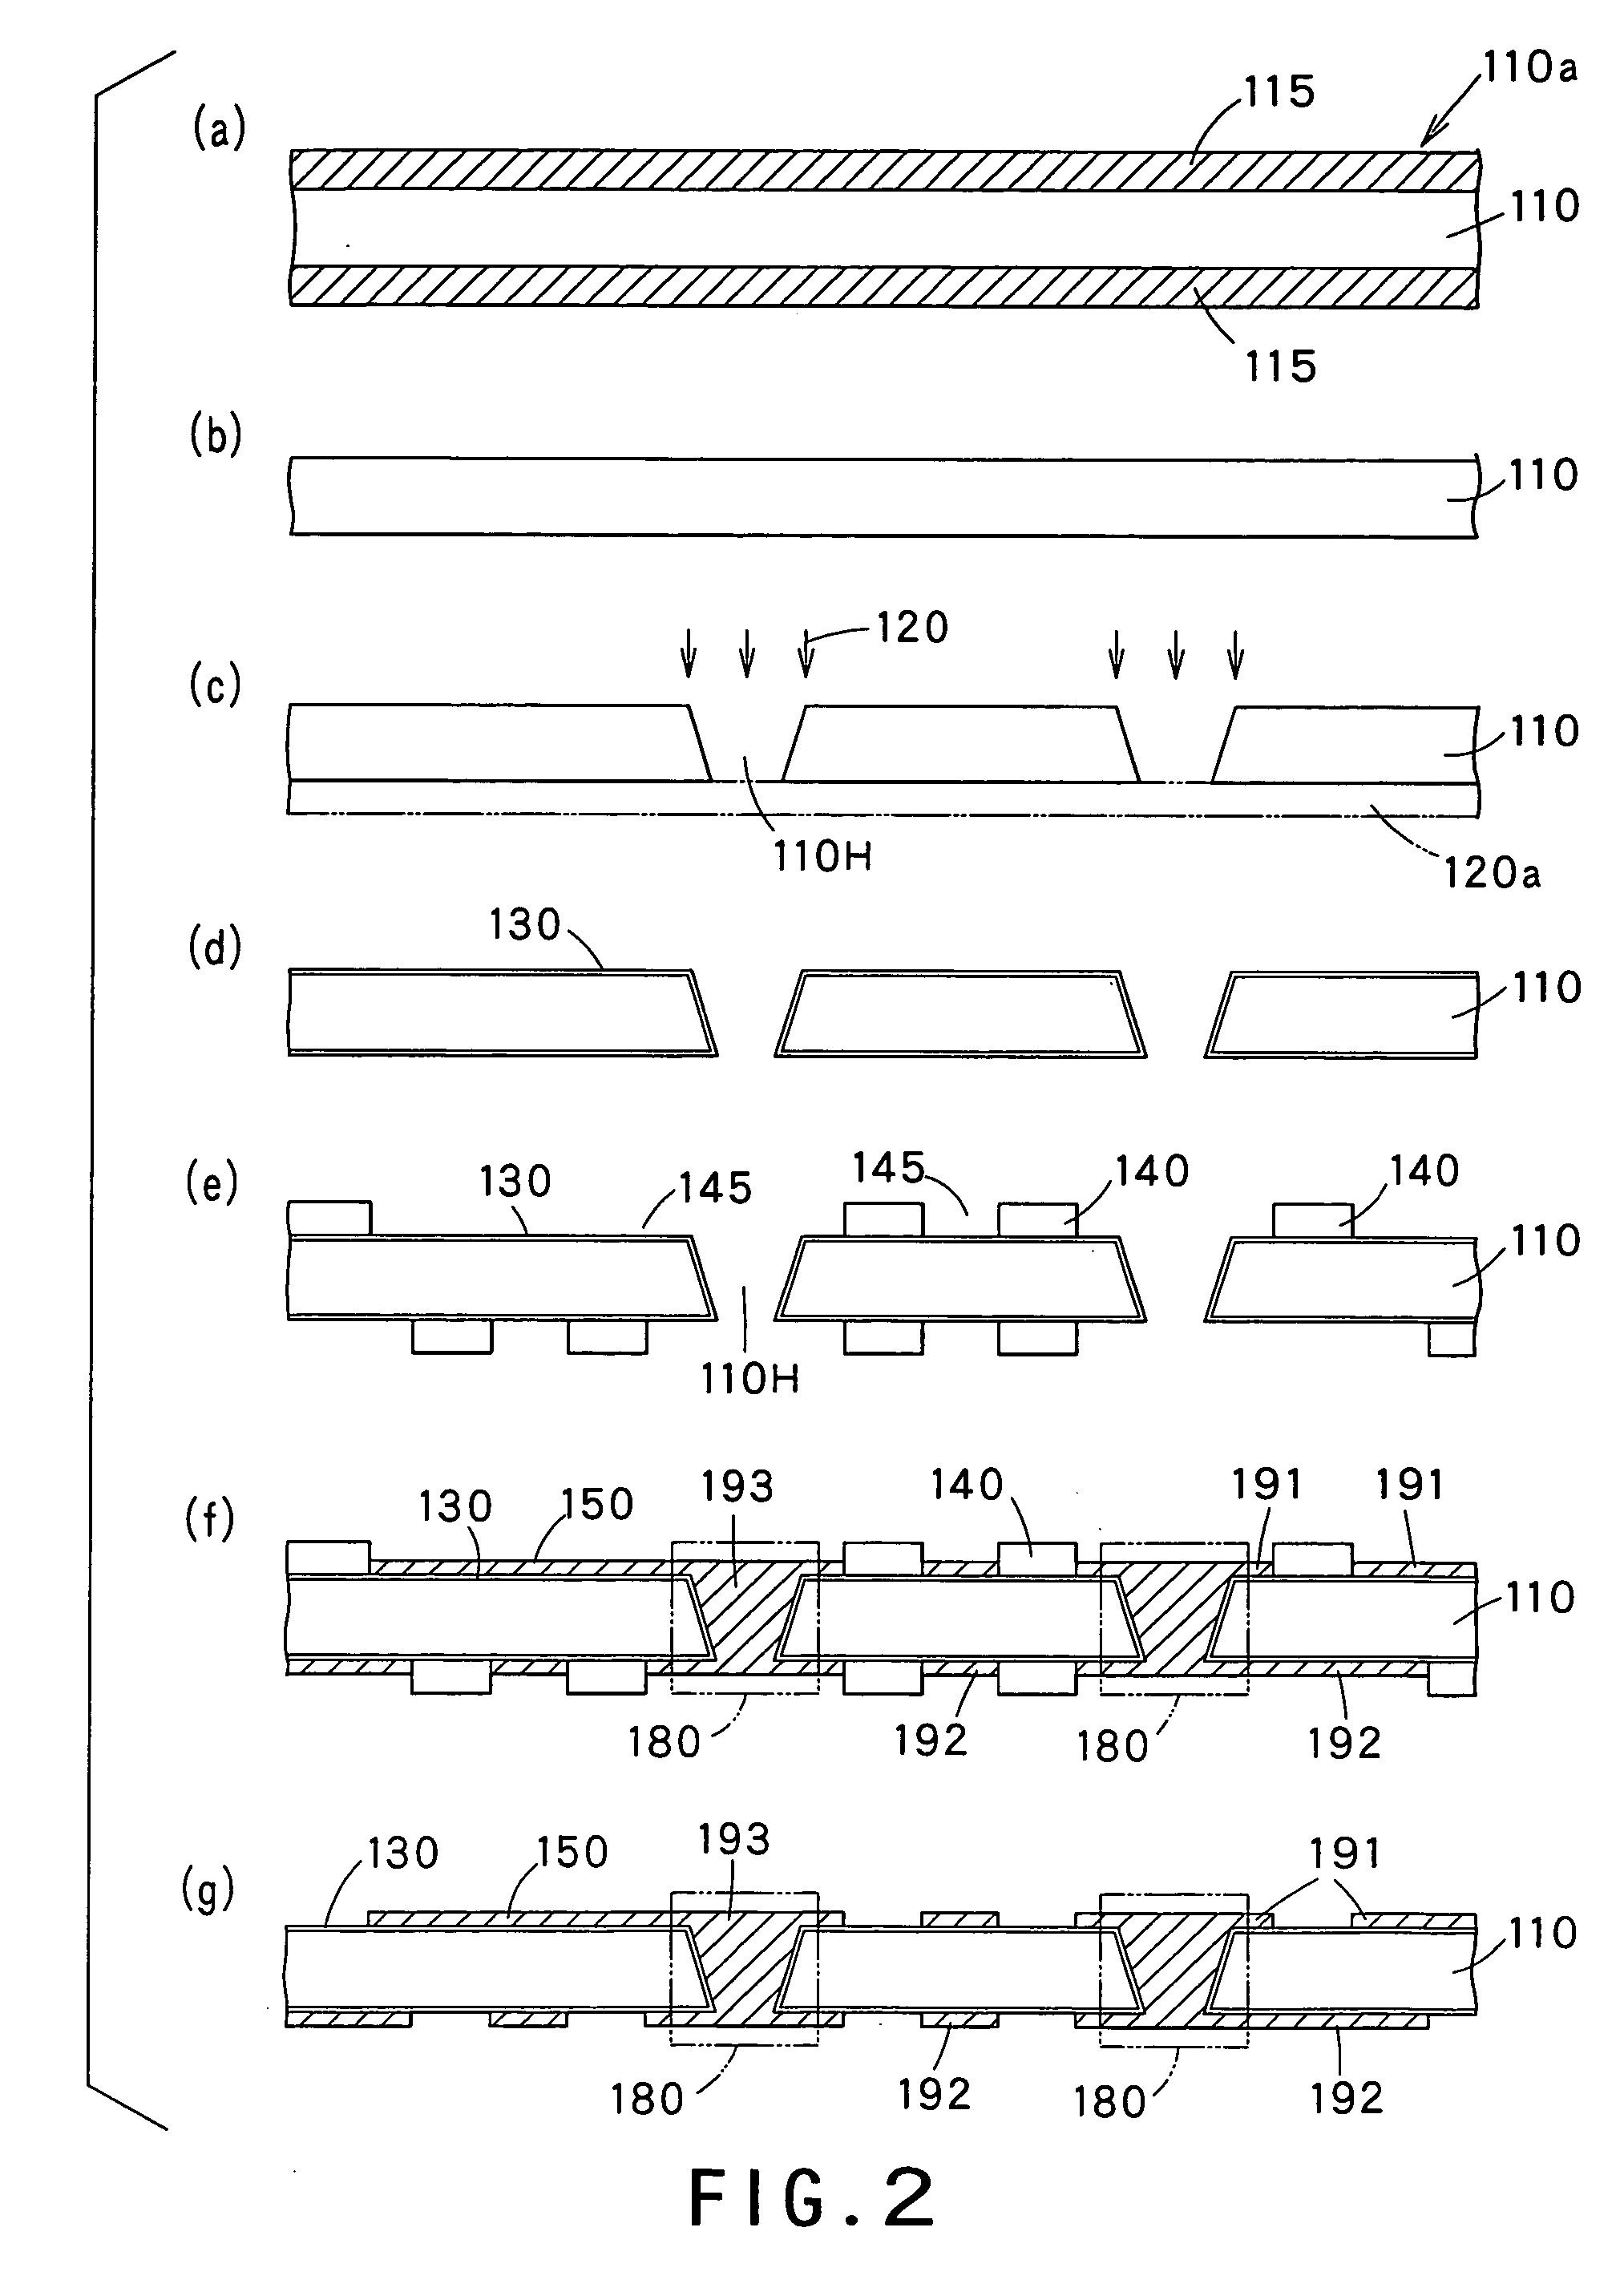 Double-sided wiring board, double sided wiring board manufacturing method, and multilayer wiring board